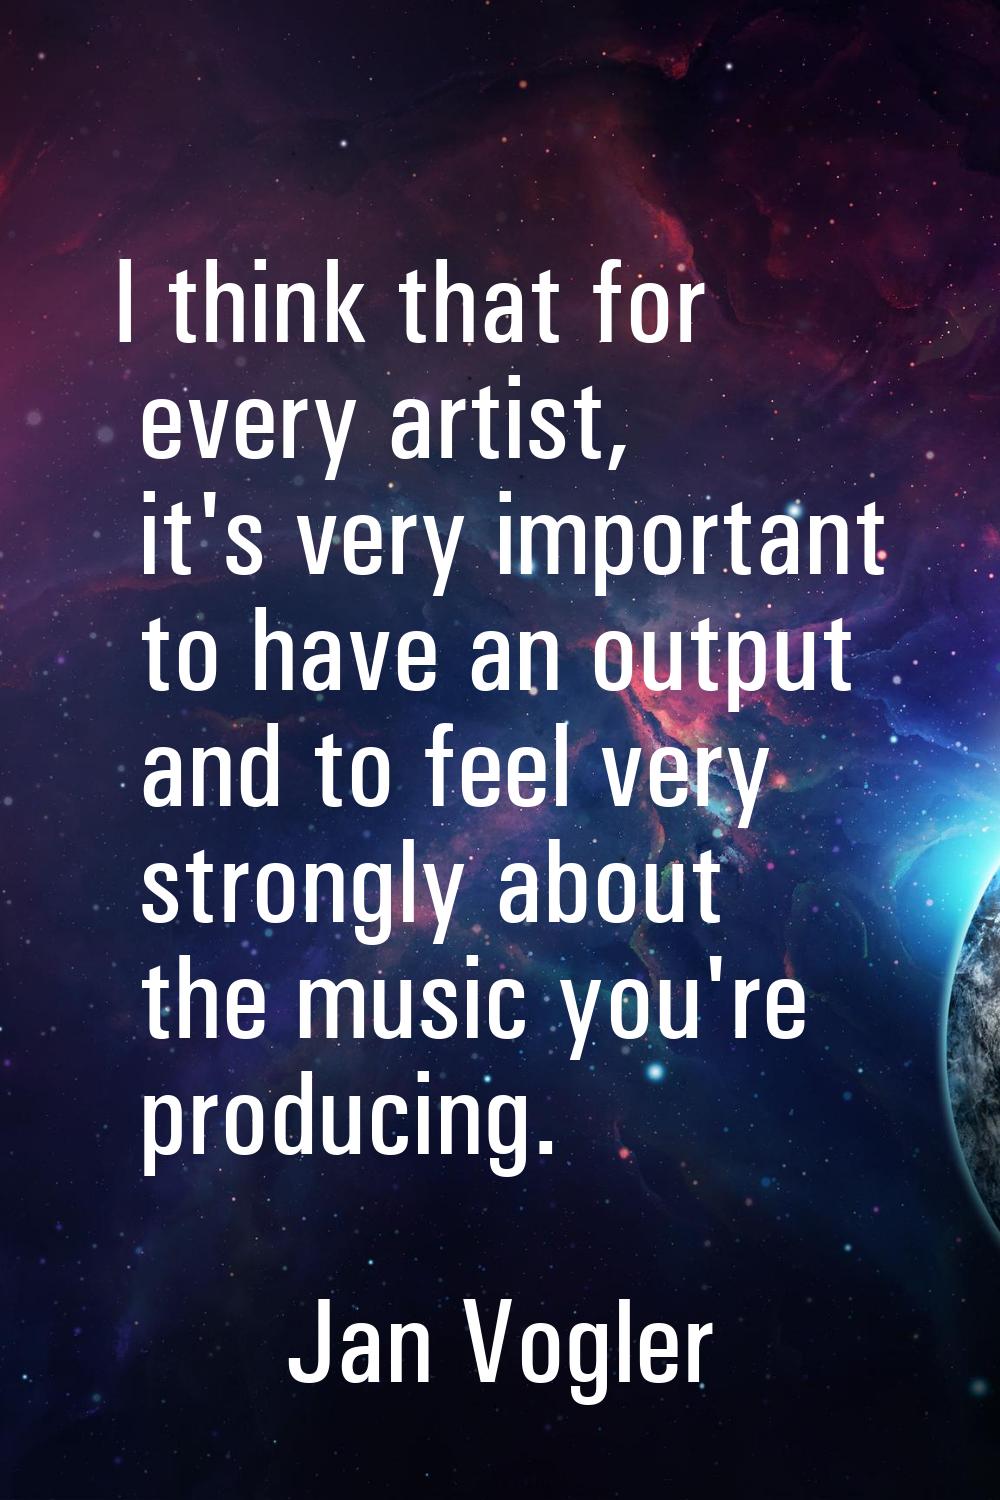 I think that for every artist, it's very important to have an output and to feel very strongly abou